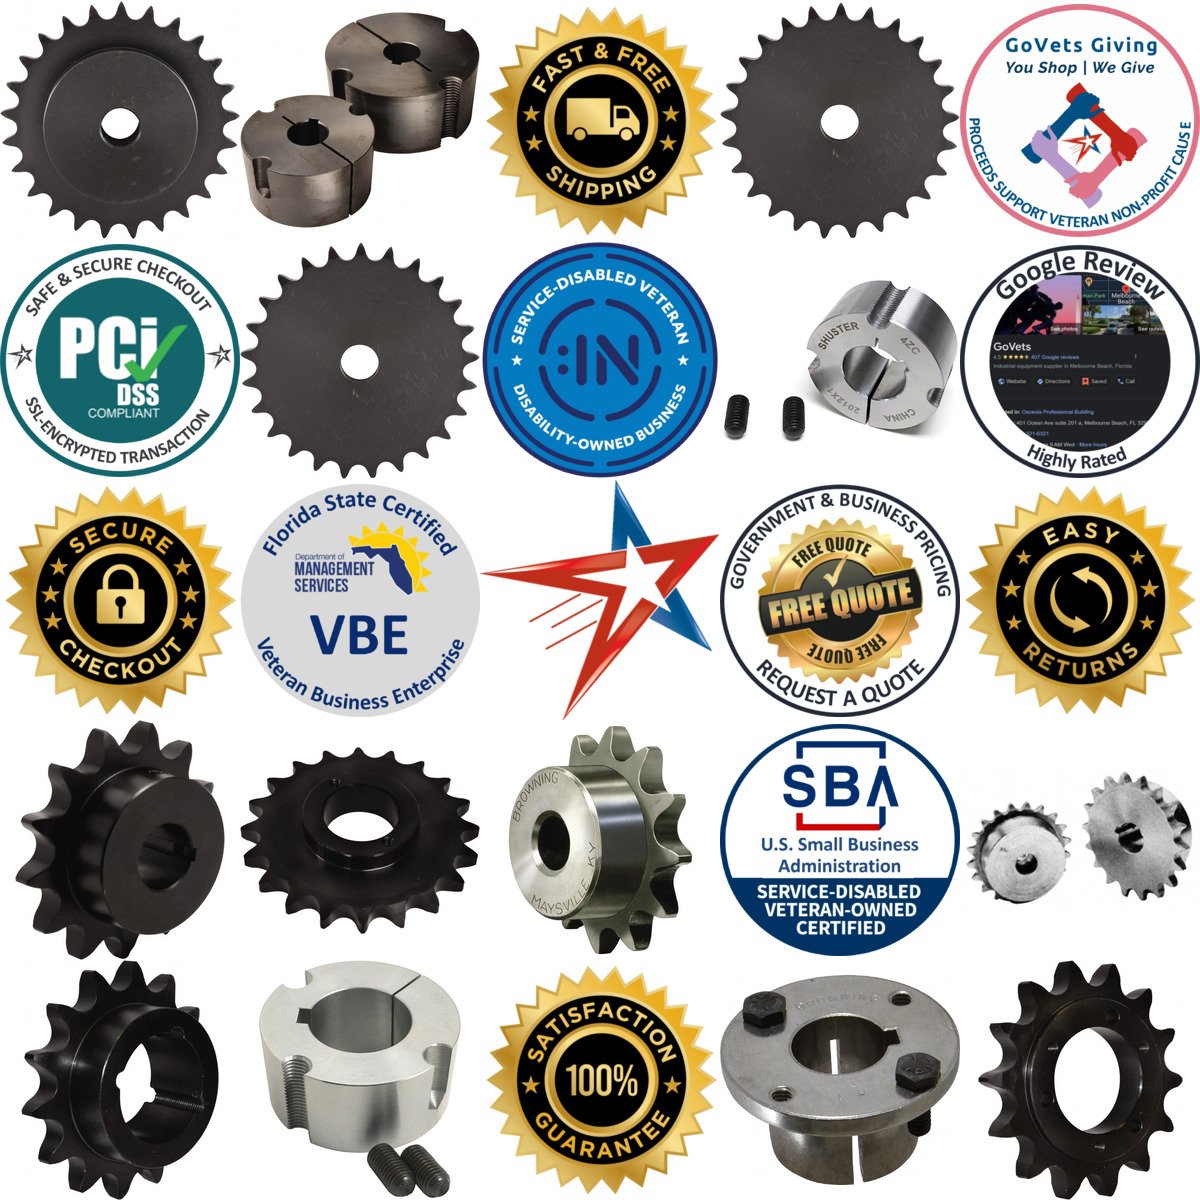 A selection of Sprockets and Sprocket Bushings products on GoVets